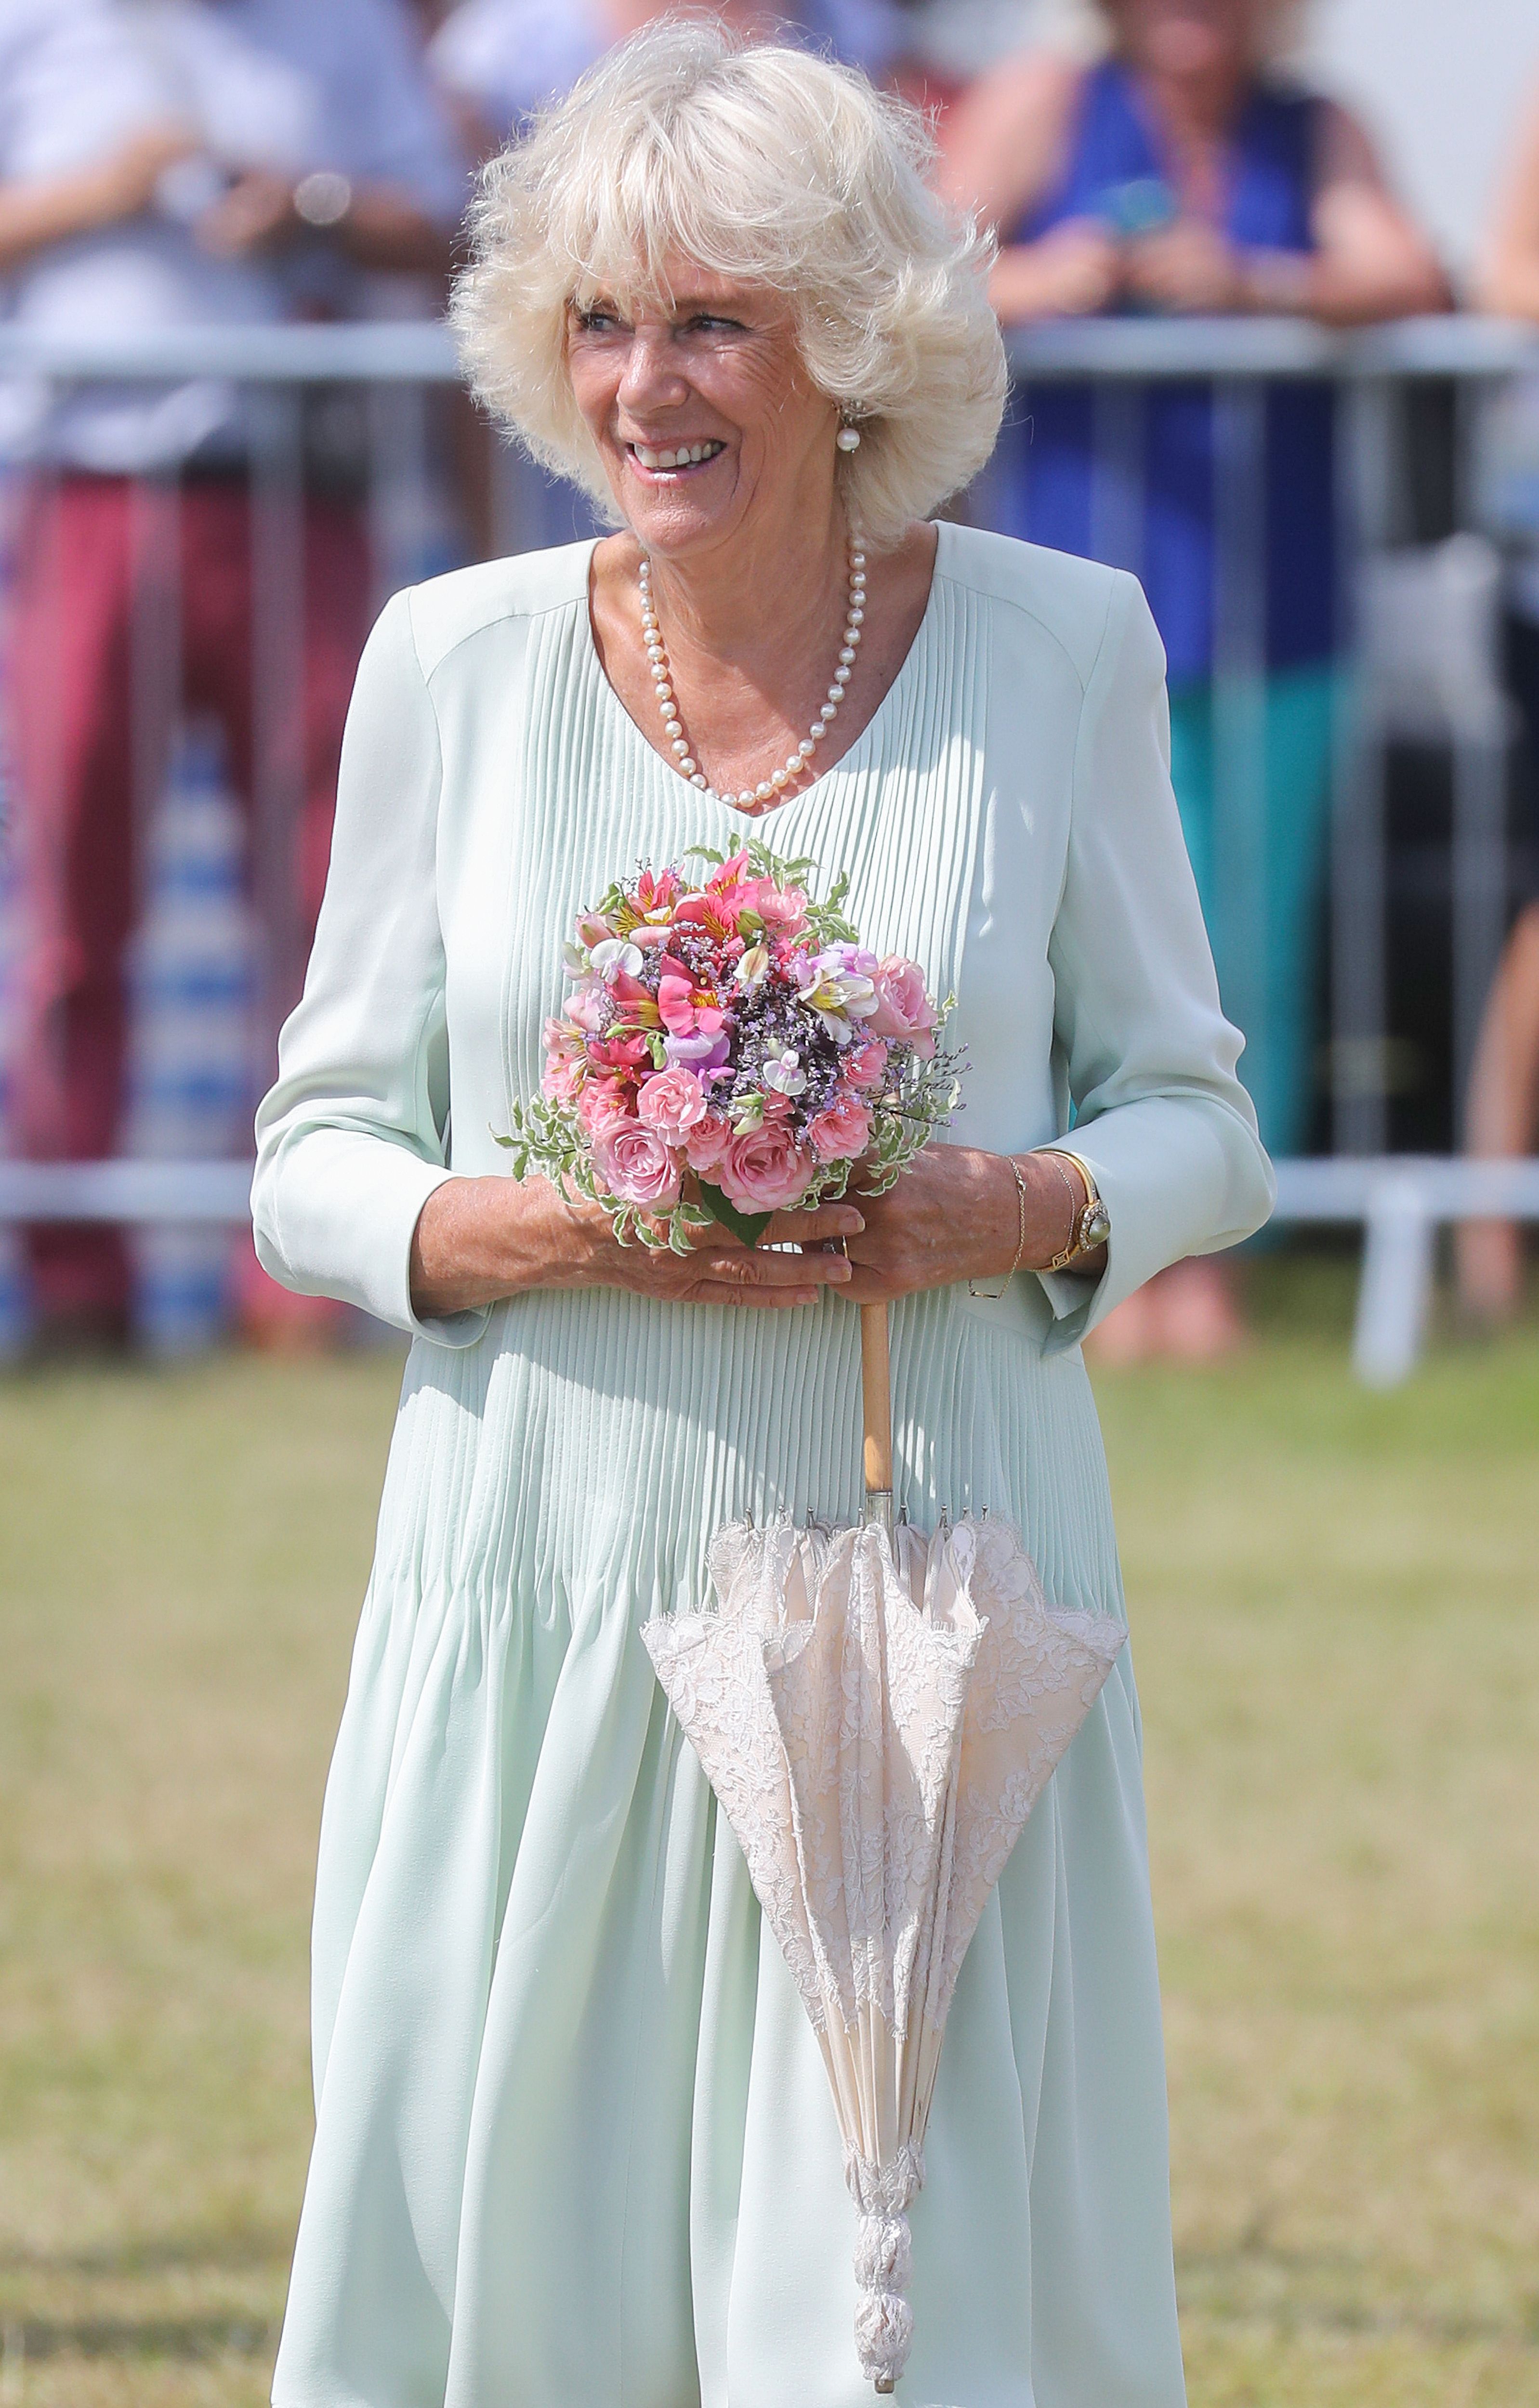 Camilla, Duchess of Cornwall during a visit to the 2019 Sandringham Flower Show at Sandringham House on July 24, 2019 | Getty Images